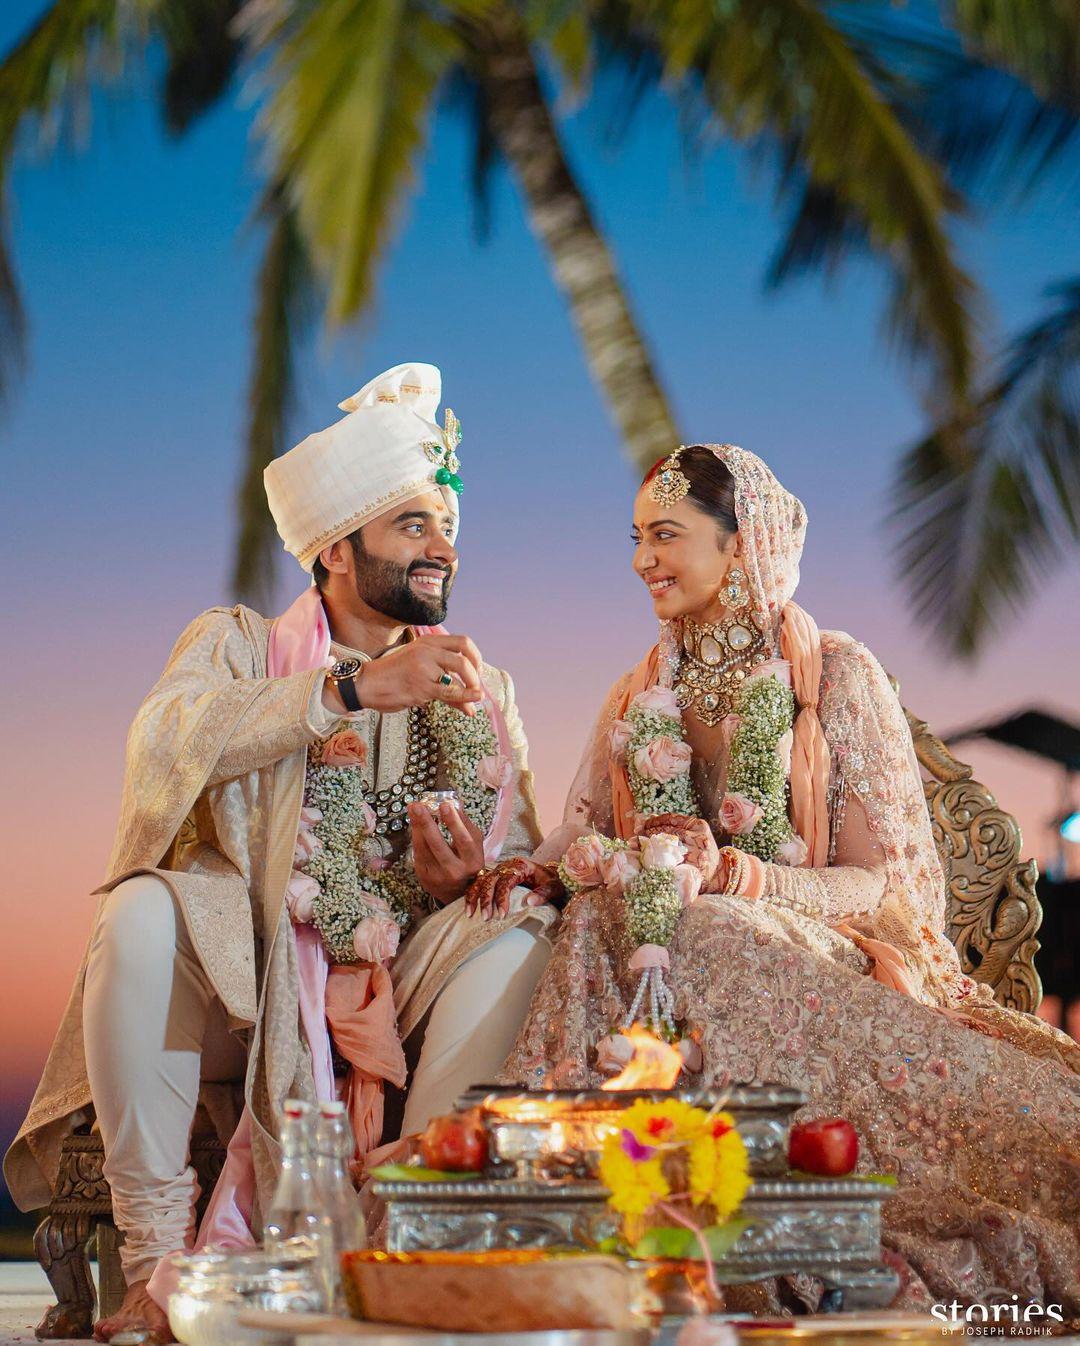 The couple was wearing outfits by designer Tarun Tahiliani. The Kaleeras for the wedding was by Mrinalini Chandra. For her choodah, Rakul opted pink colour which looked stunning